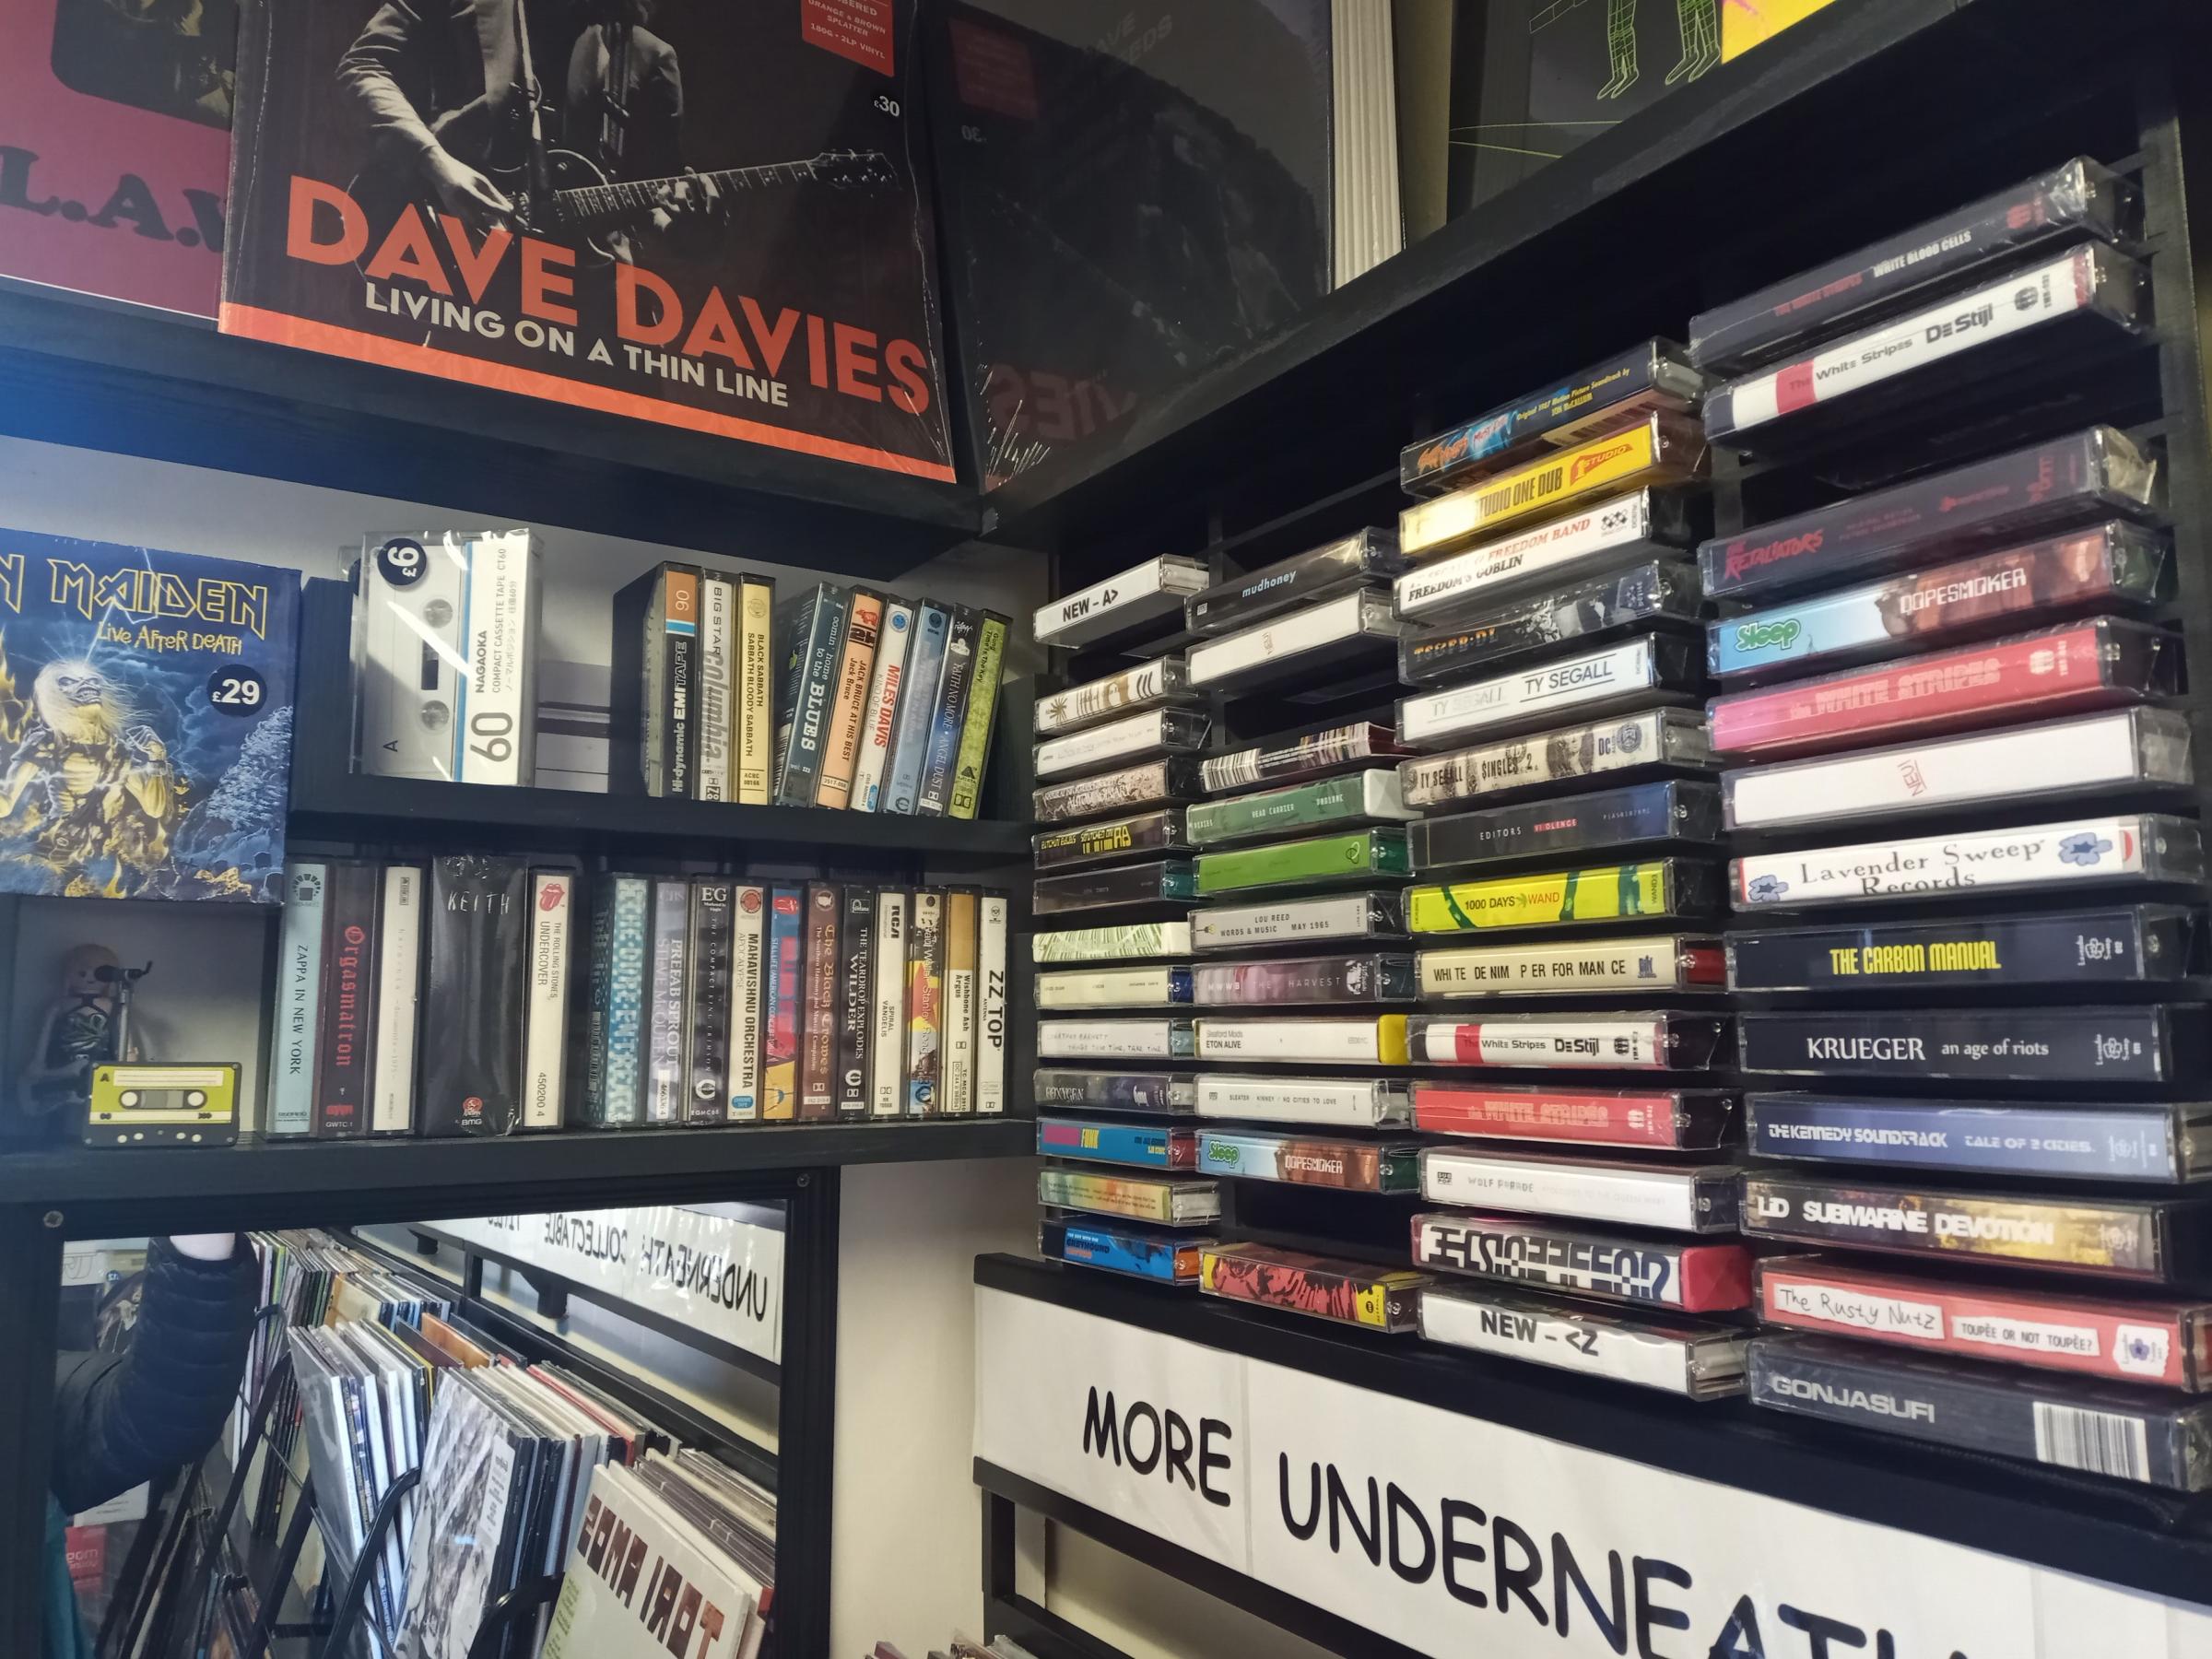 A variety of formats available at VOD Music in Mold